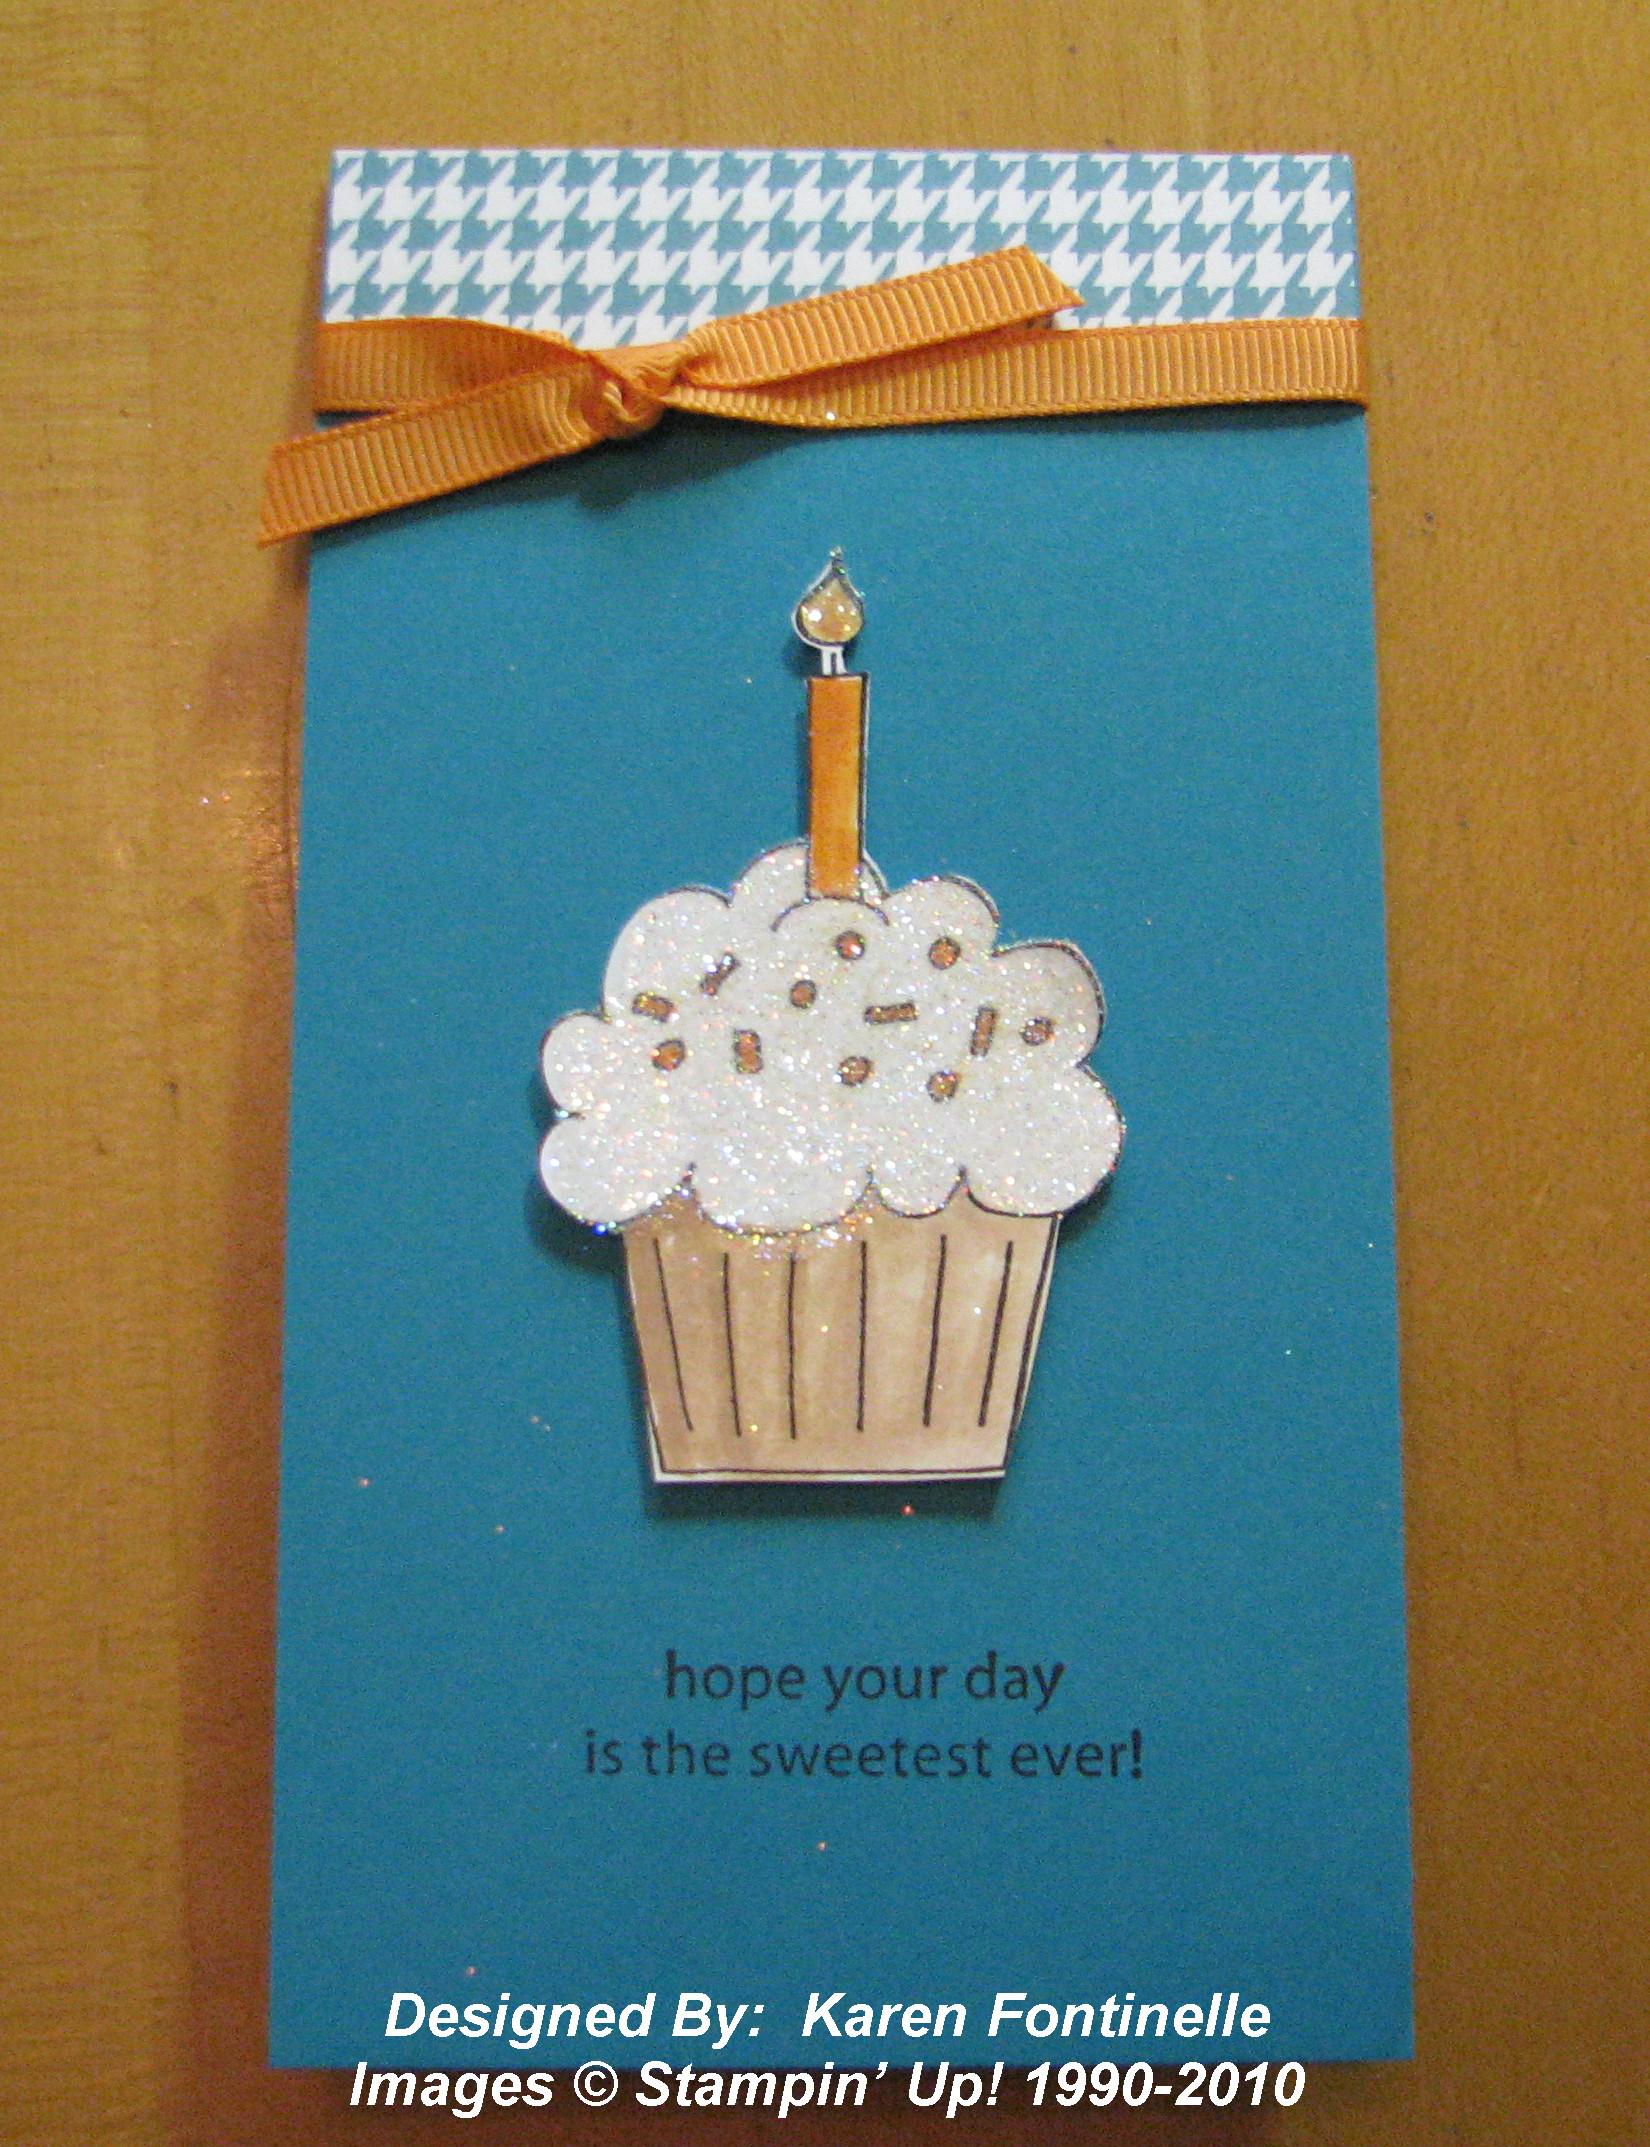 Creative Birthday Cards Ideas A Simple Birthday Card Stamping With Karen